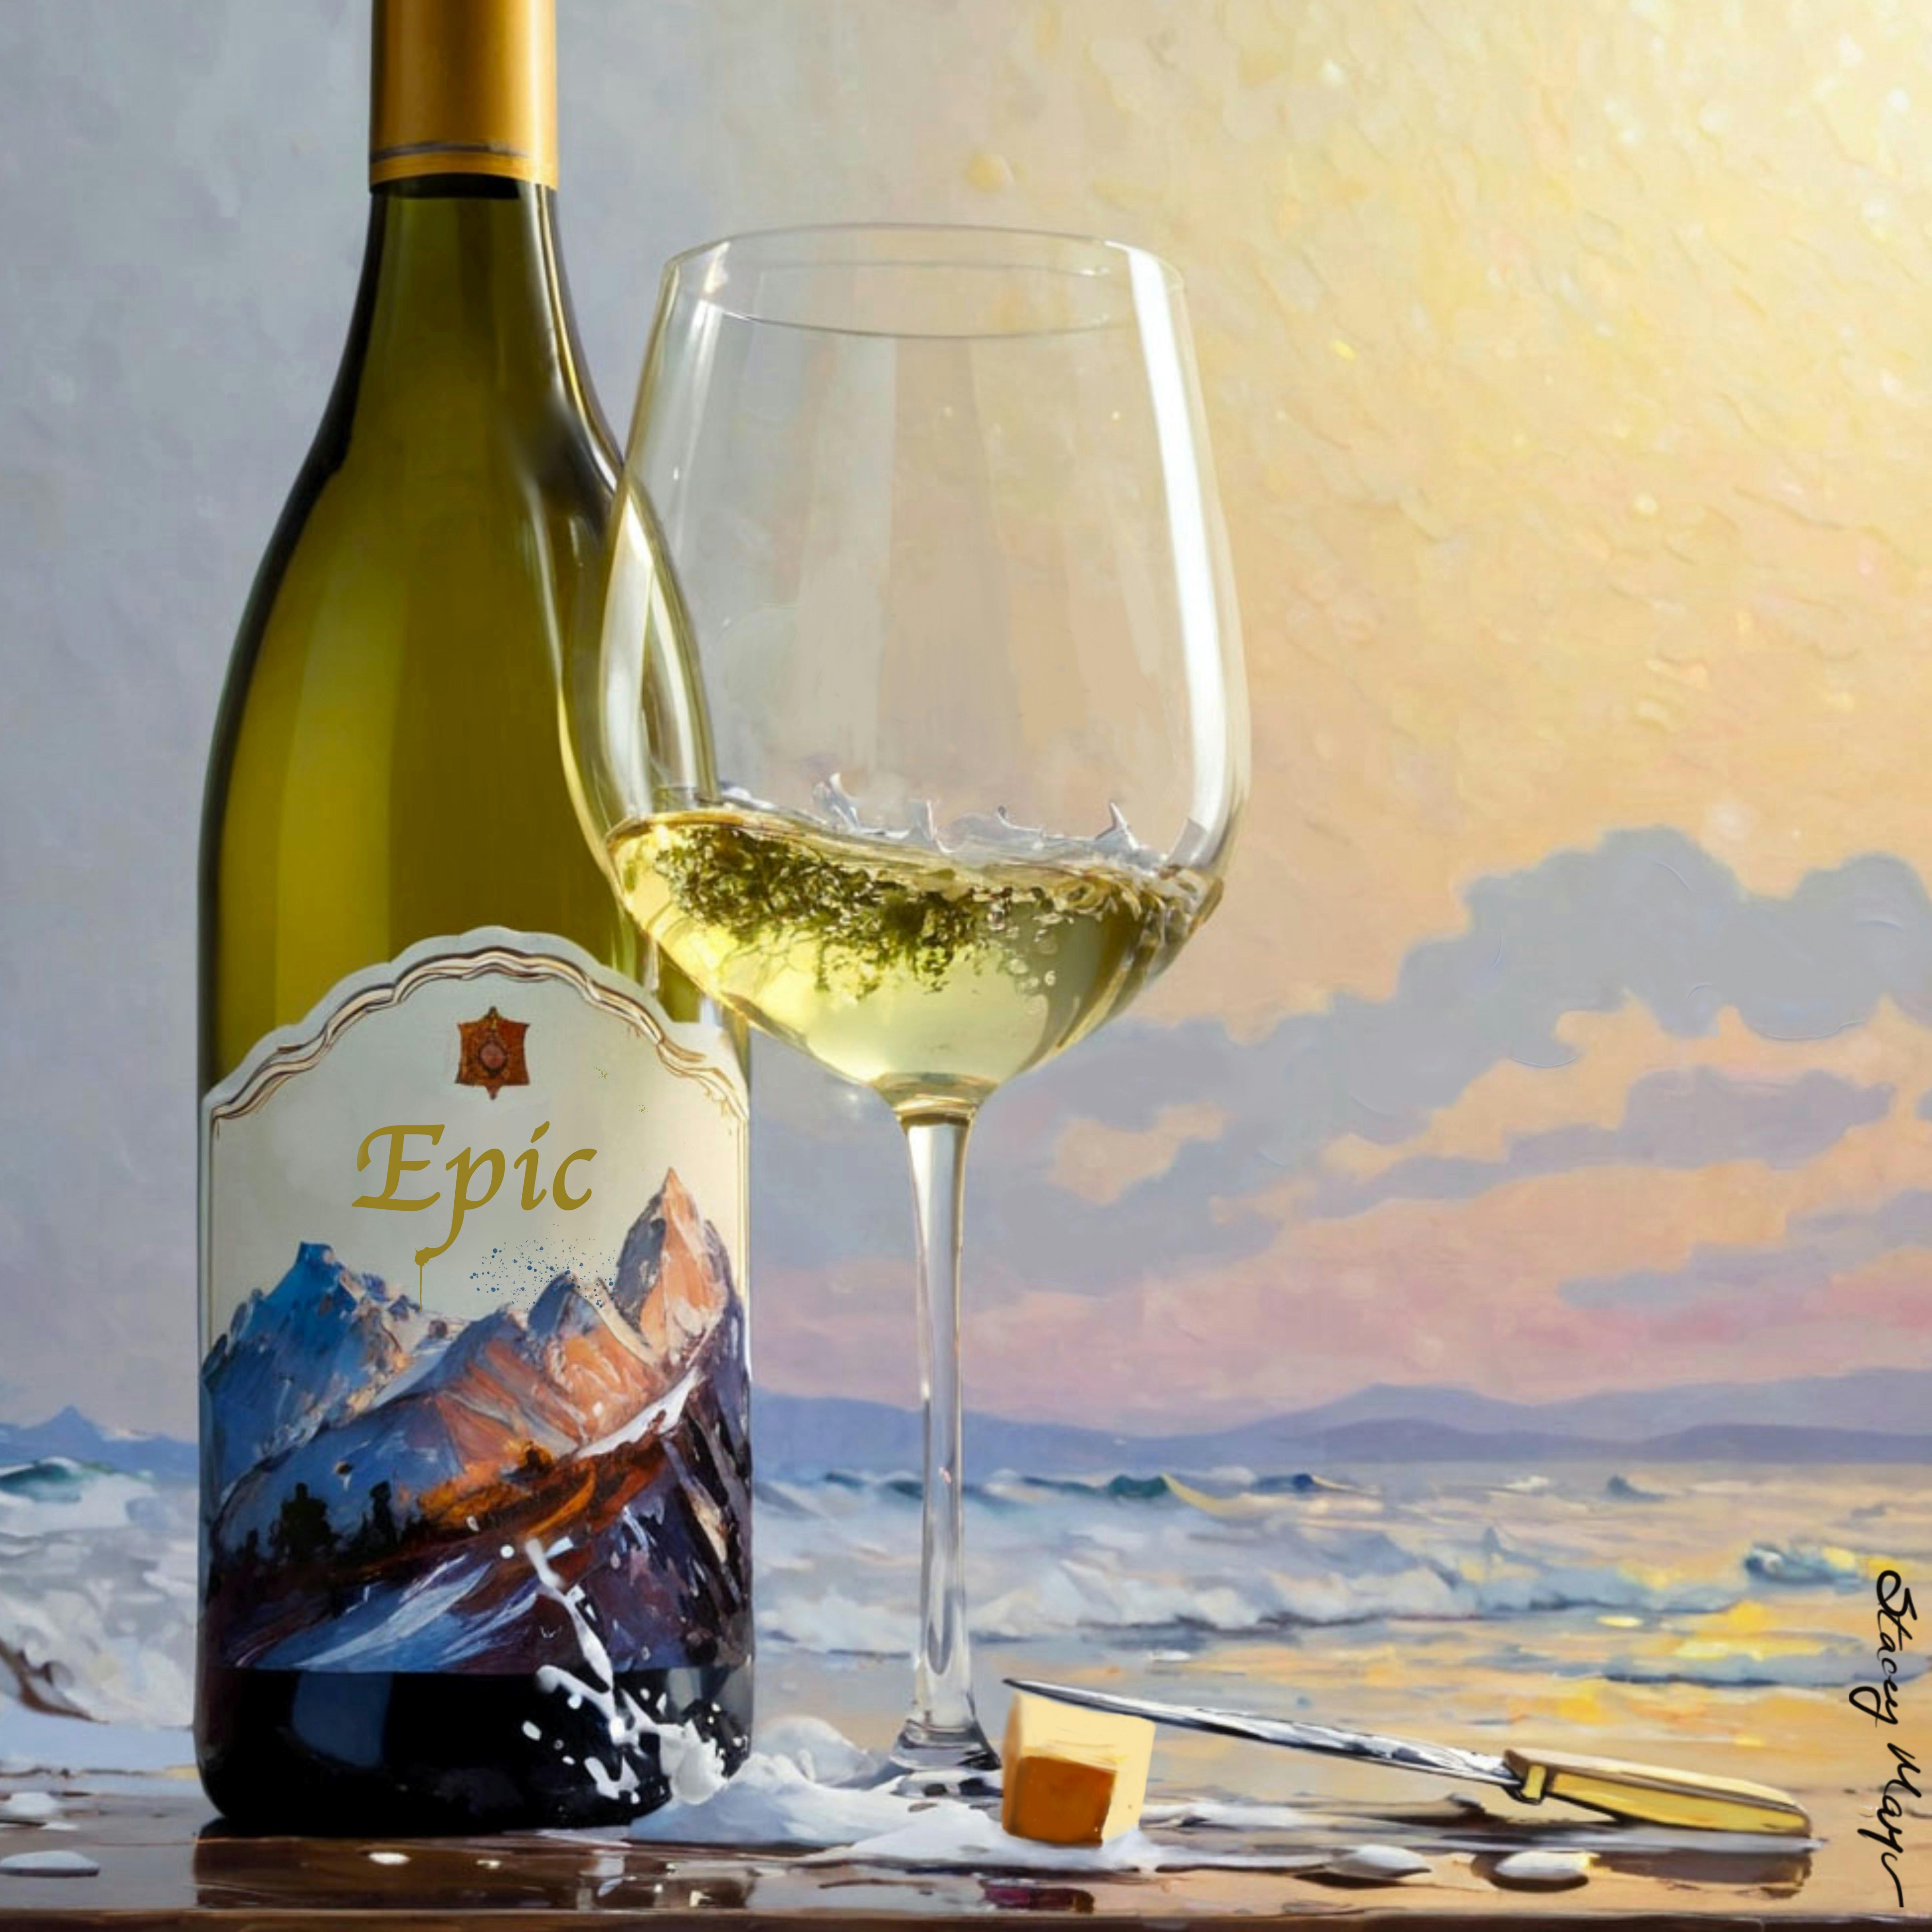 Fine art, wine and cheese, sunrise at the oceans